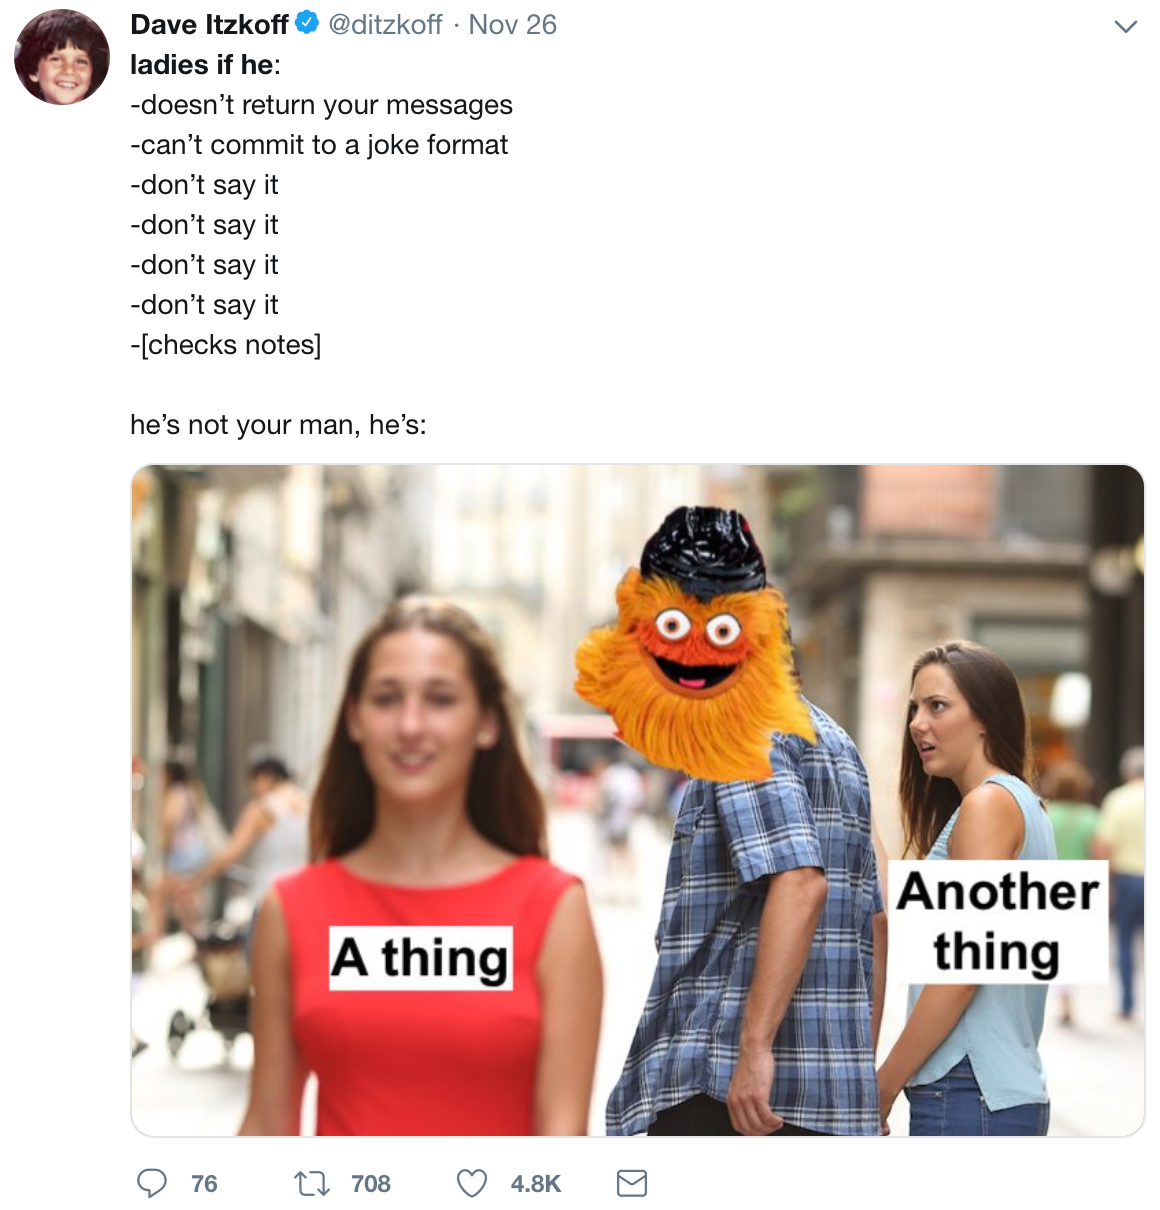 twitter meme david hogg meme - Dave Itzkoff ditzkoff.Nov 26 ladies if he doesn't return your messages can't commit to a joke format don't say it don't say it don't say it don't say it checks notes he's not your man, he's Another A thing thing 76 17708